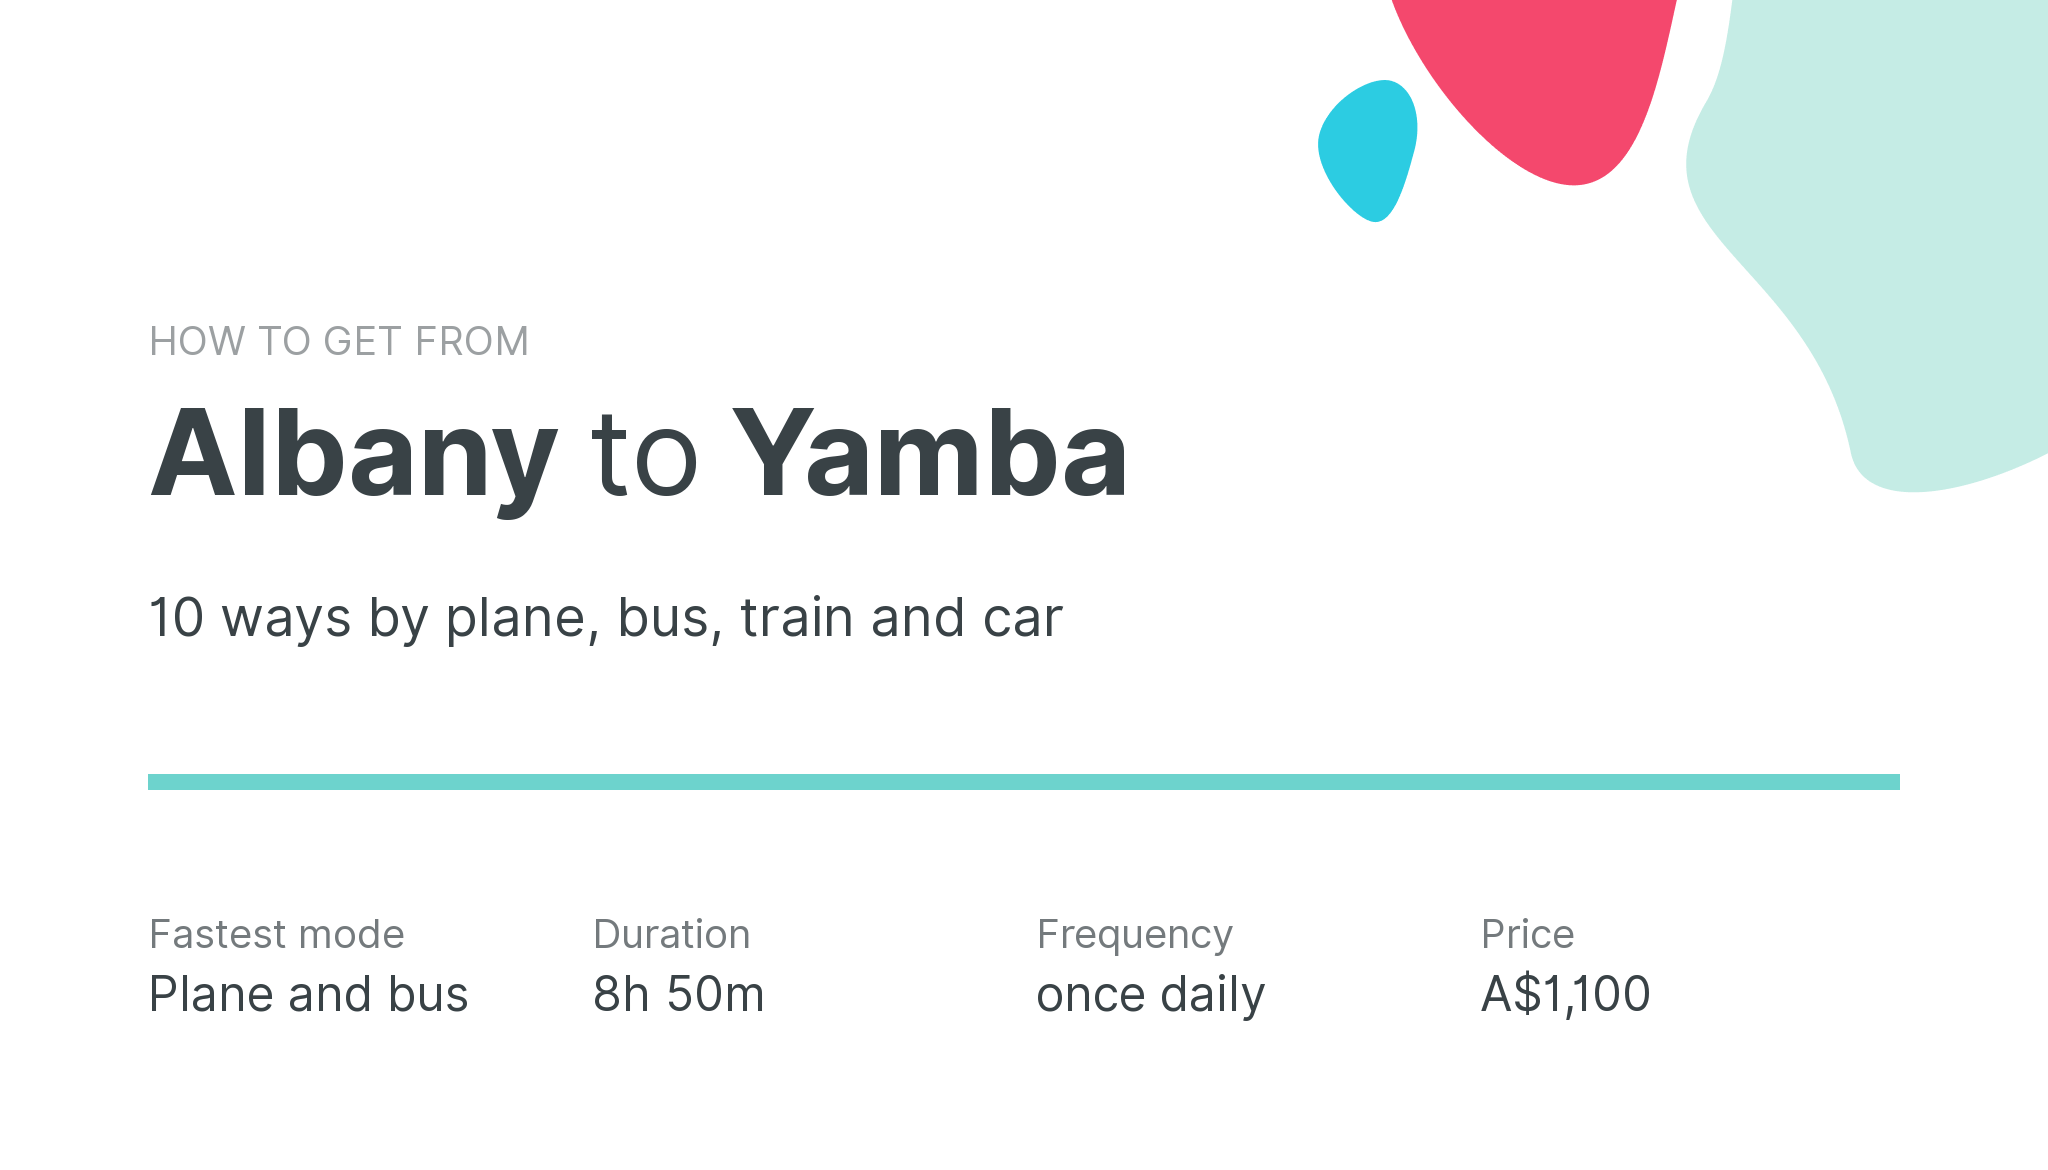 How do I get from Albany to Yamba